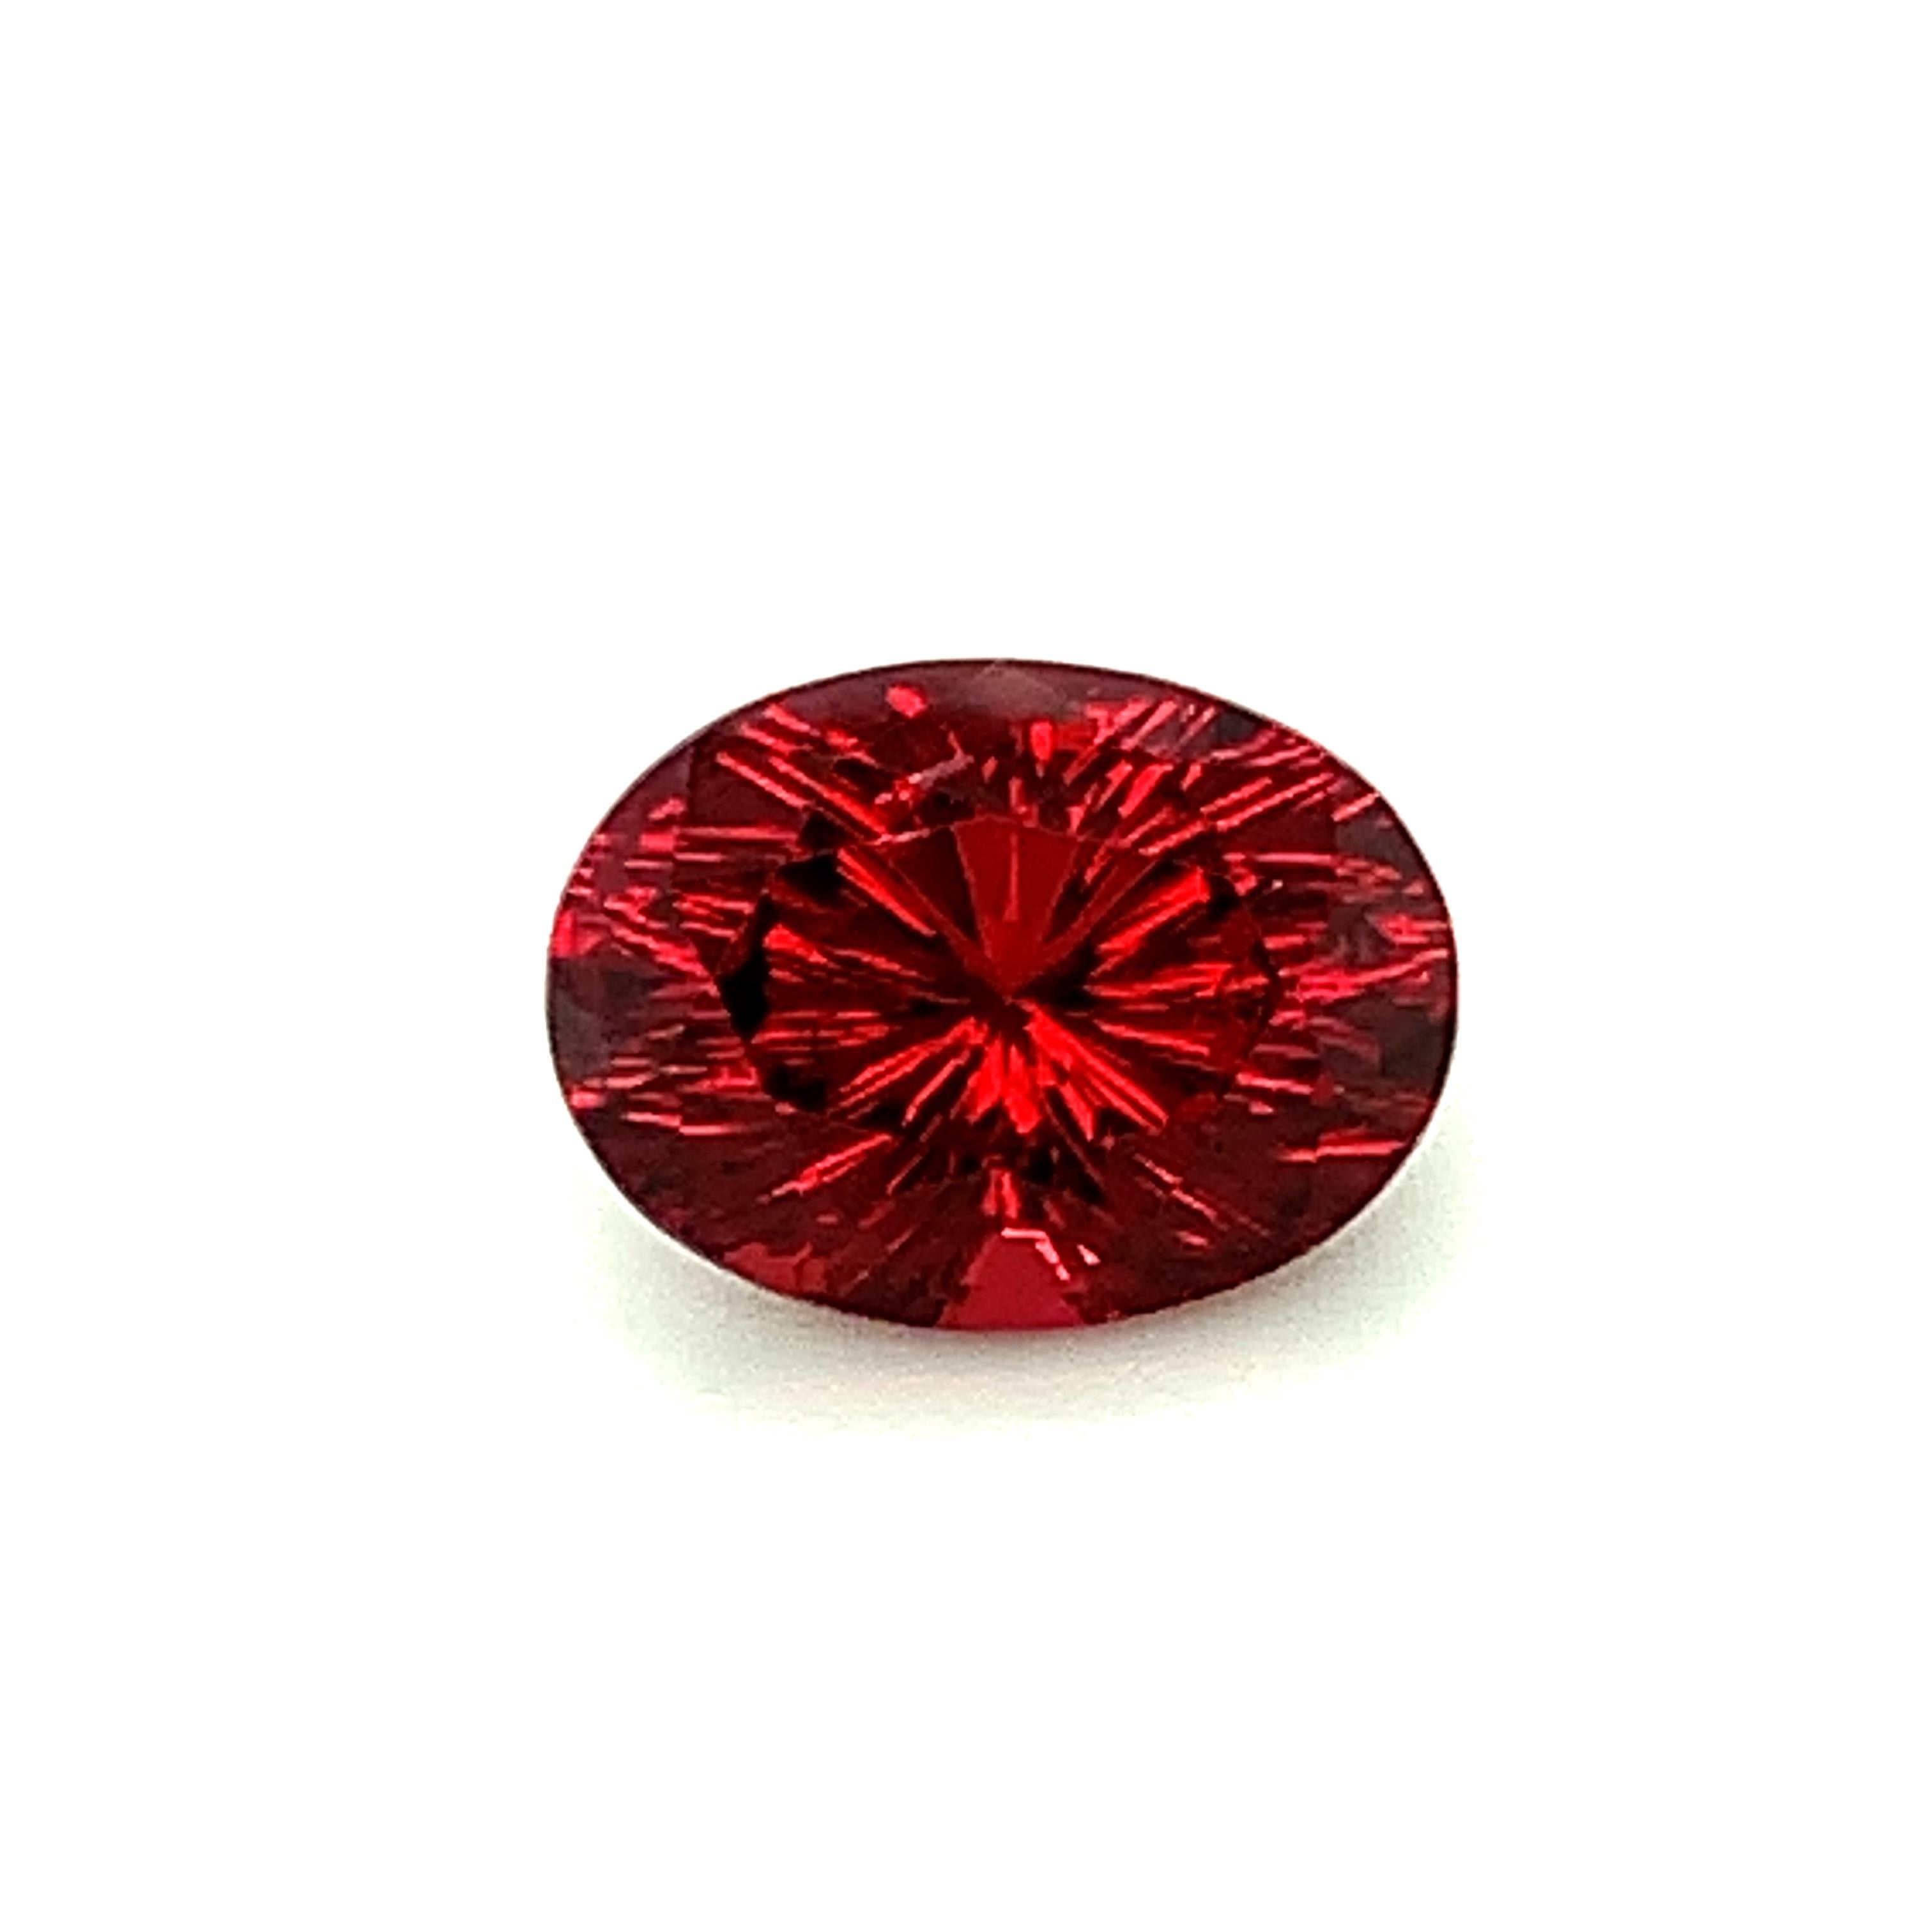 Artisan Unheated 4.84 Carat Red Spinel Oval, Unset Loose Gemstone, GIA Certified